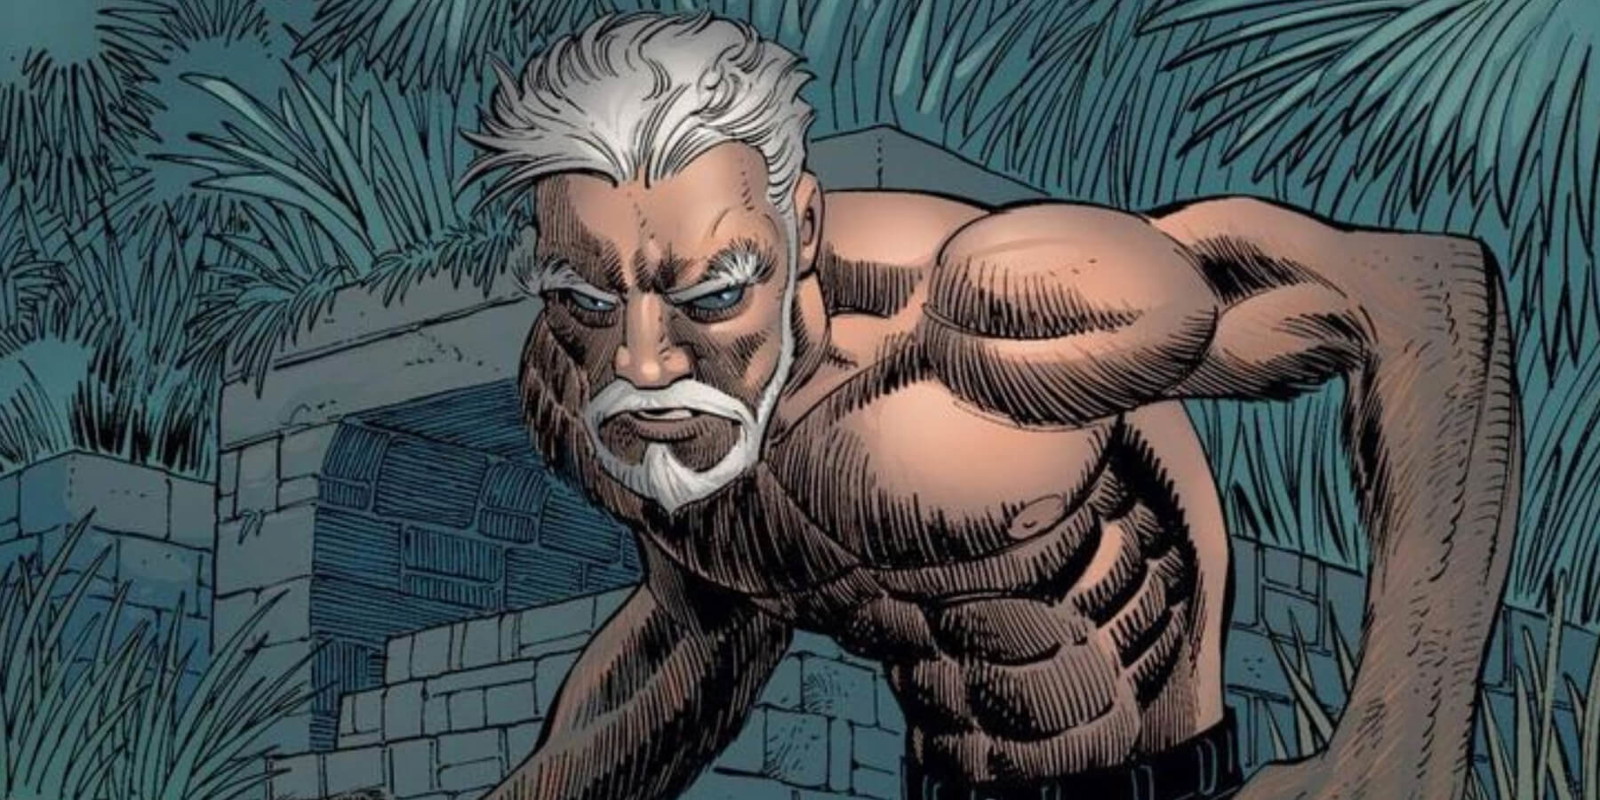 Ezekiel looking on in anger in this comic book panel